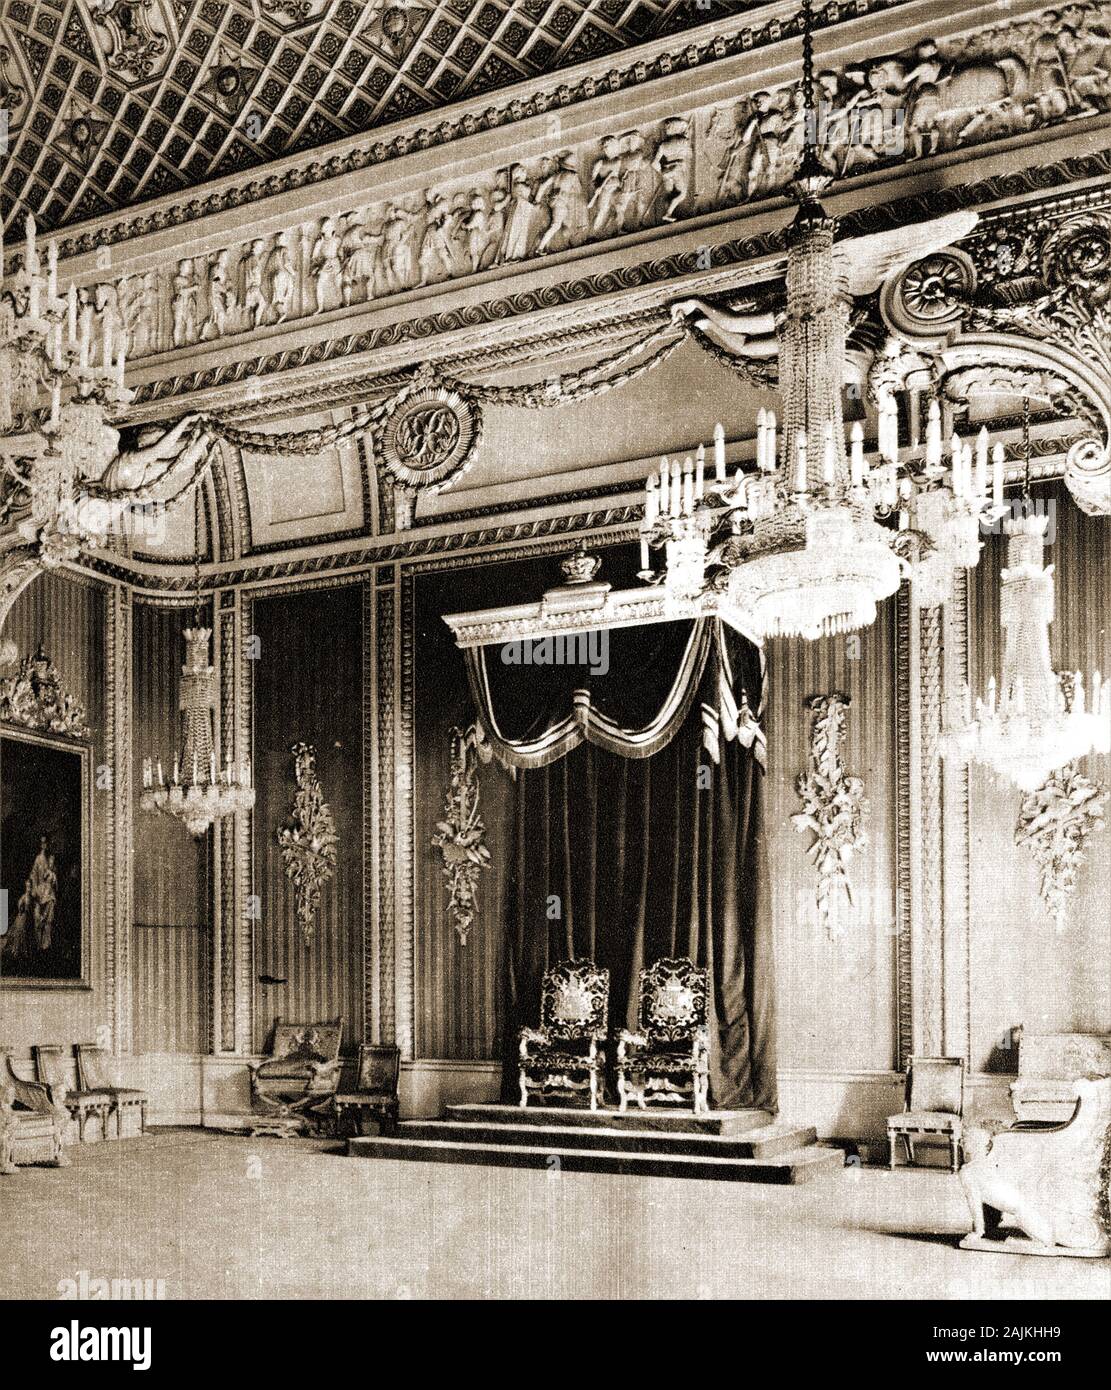 1920. The  royal throne room at Buckingham Palace, London, UK,  after being made ready for debutantes  (young upper class women) to be presented the King & Queen. The last debutantes were presented in this way in  1958, after which Queen Elizabeth II abolished the ceremony. Queen Charlotte's Ball, a contemporary revival of the tradition is still organised annually by the Duke of Somerset. Stock Photo